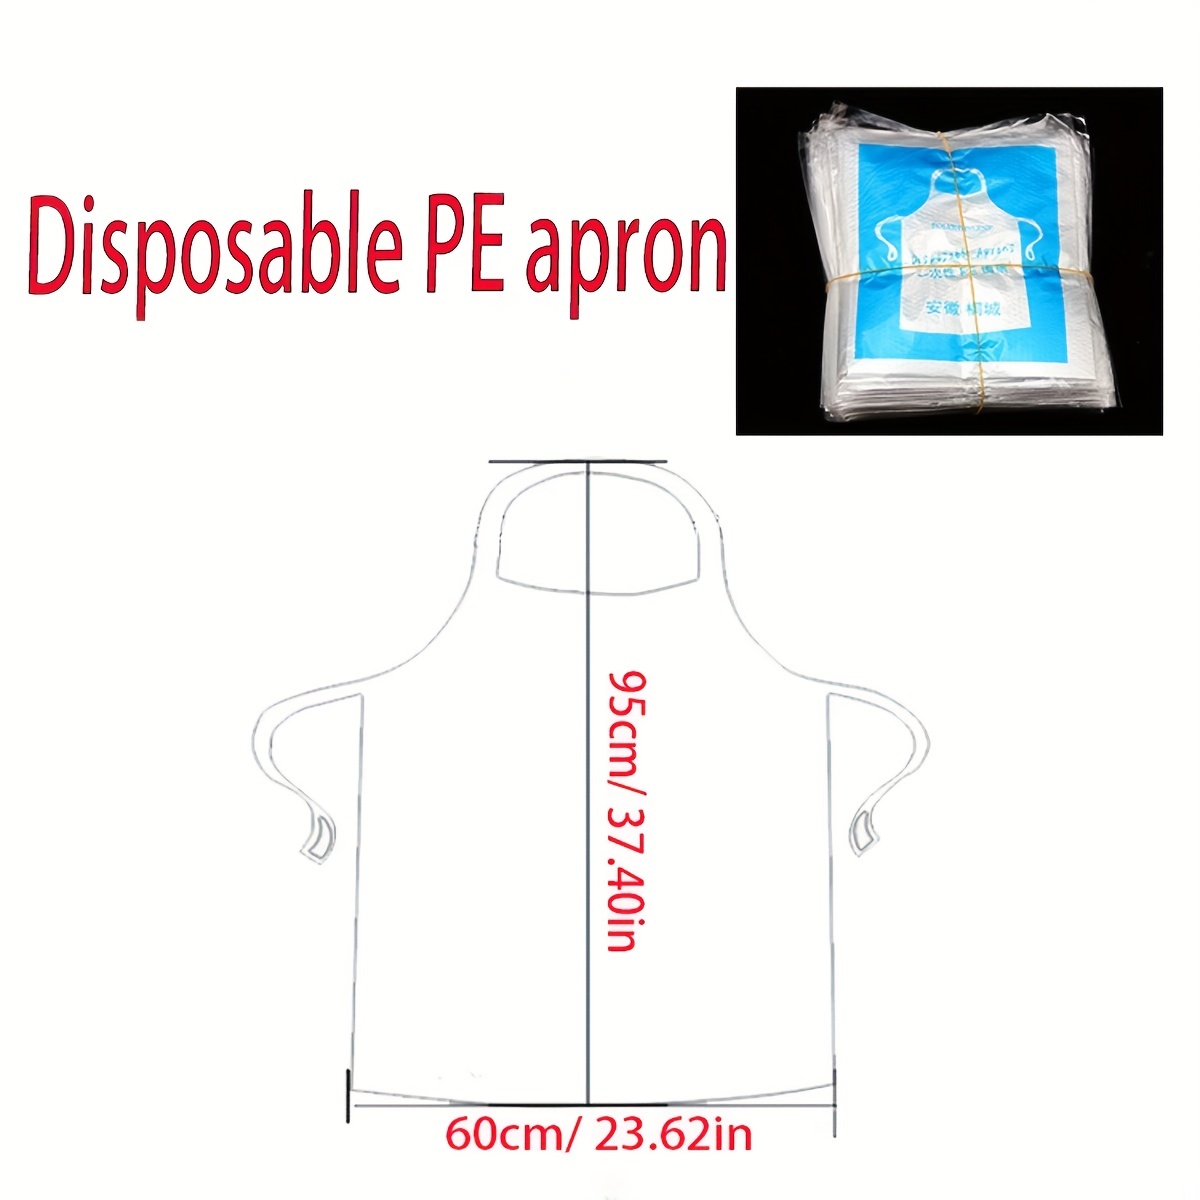 Clear Waterproof Disposable Aprons For Cooking, Serving, Painting